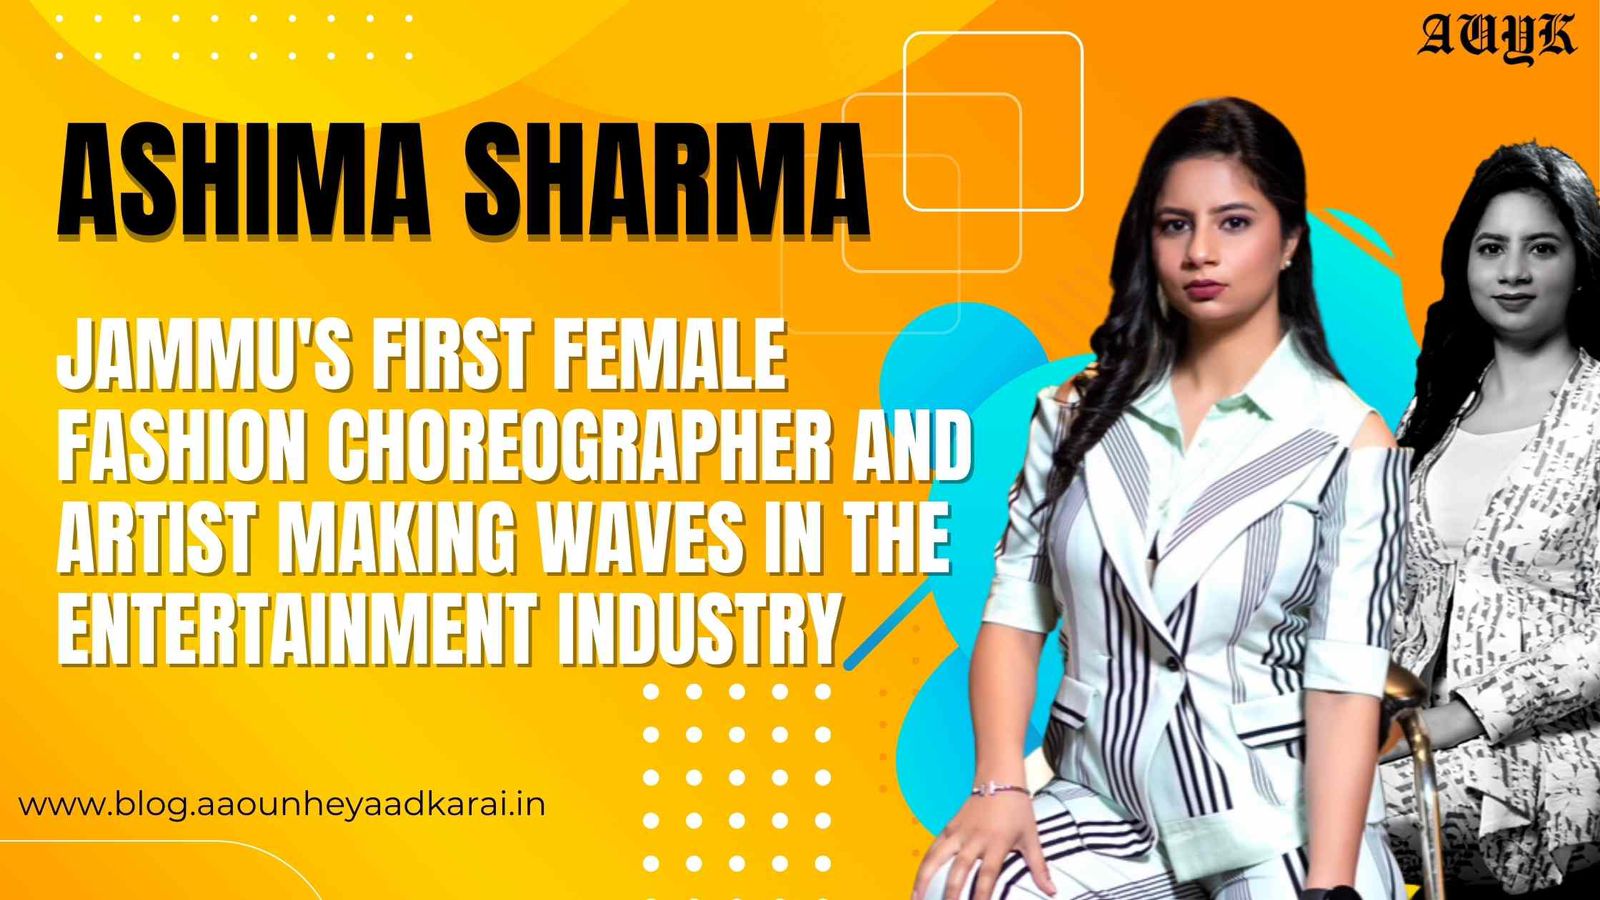 Ashima Sharma-Jammu's First Female Fashion Choreographer and Artist Making Waves in the Entertainment Industry